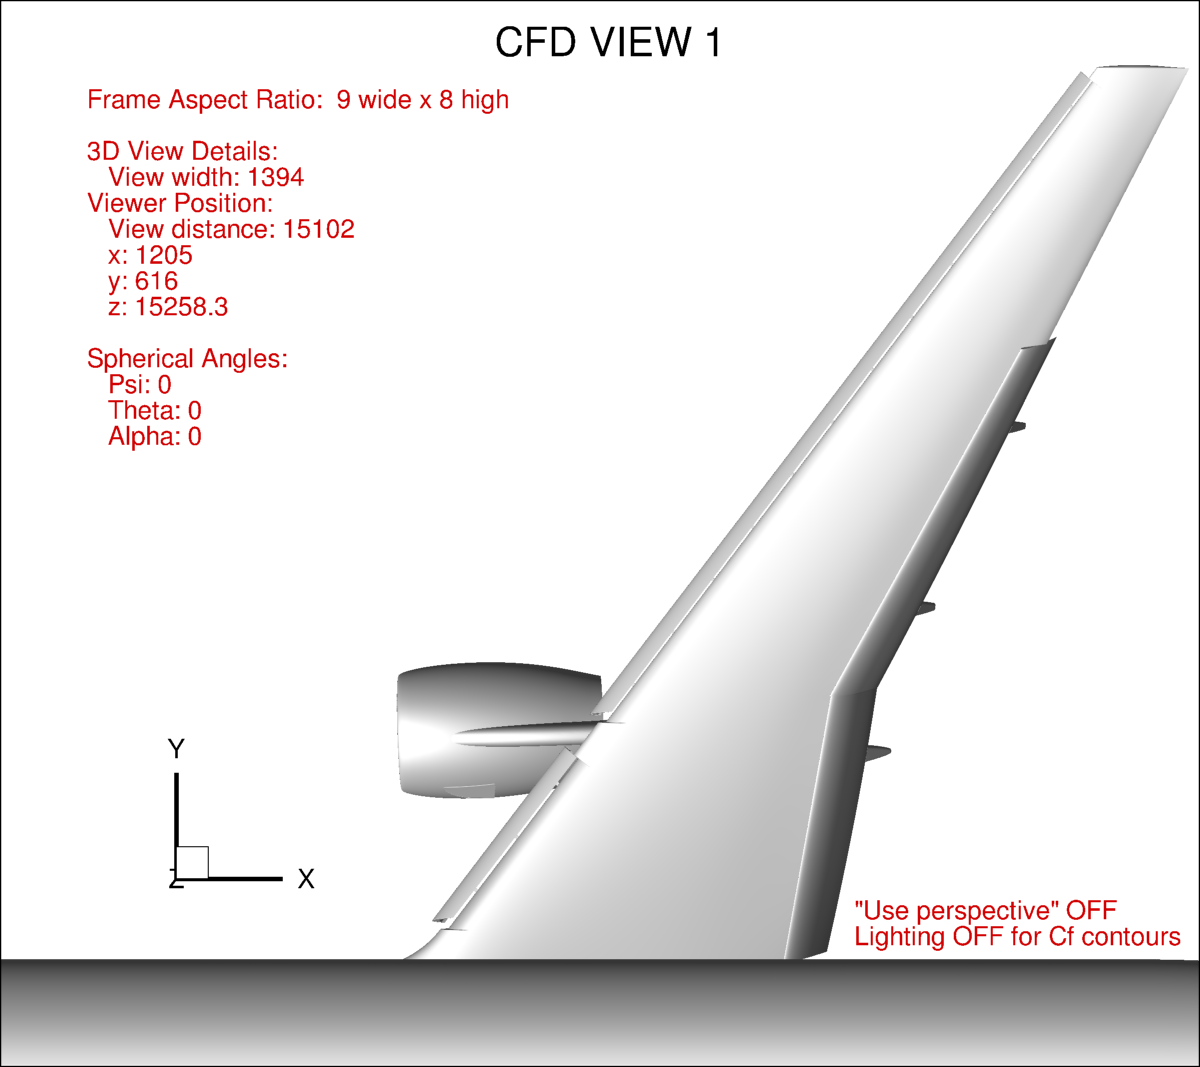 Example CFD view #1